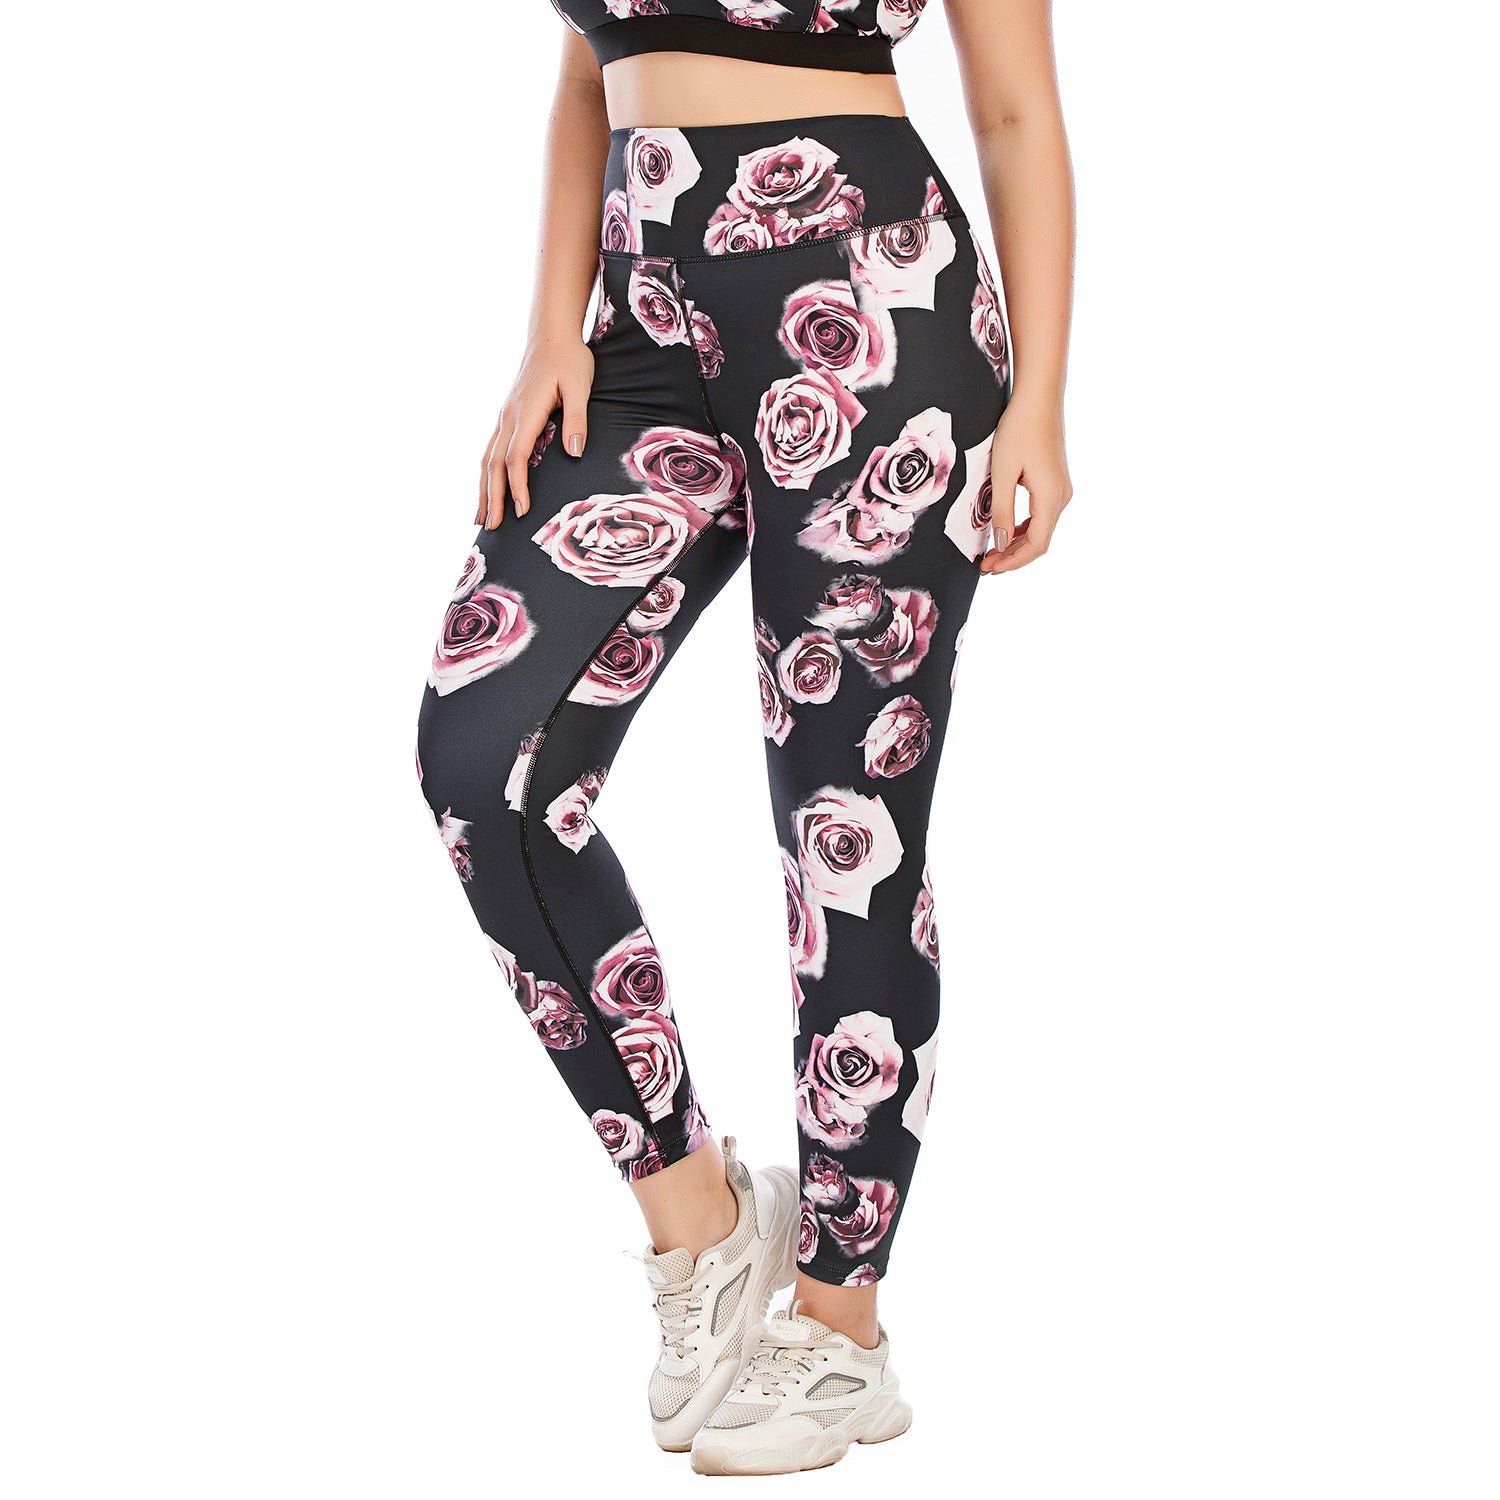 Rose Printed Workout Yoga Pants for Women Plus Size